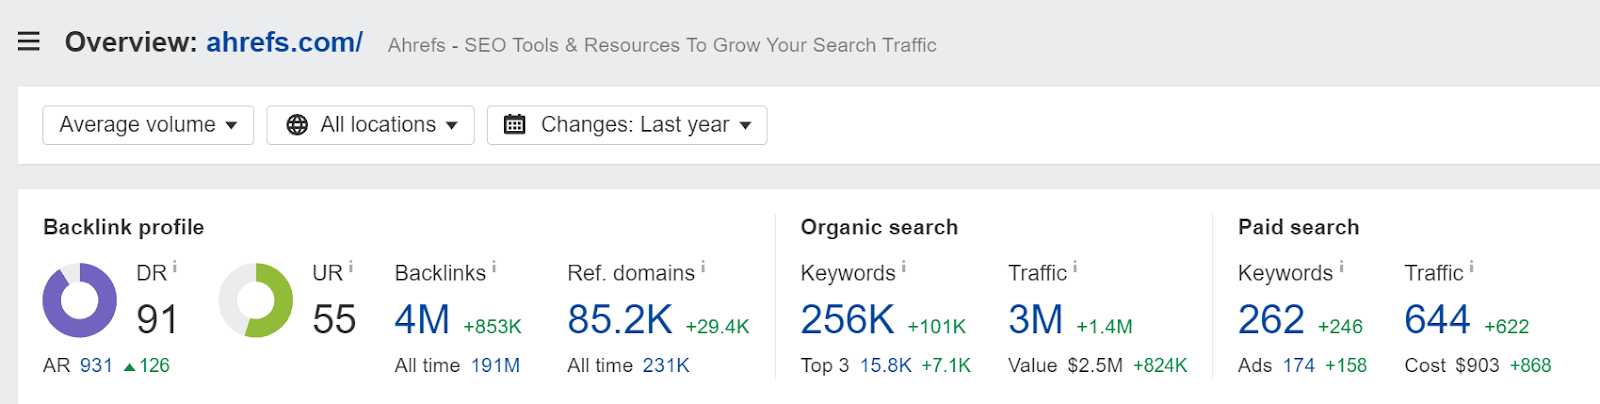 YoY SEO metrics for your domain, via the Overview in Ahrefs' Site Explorer